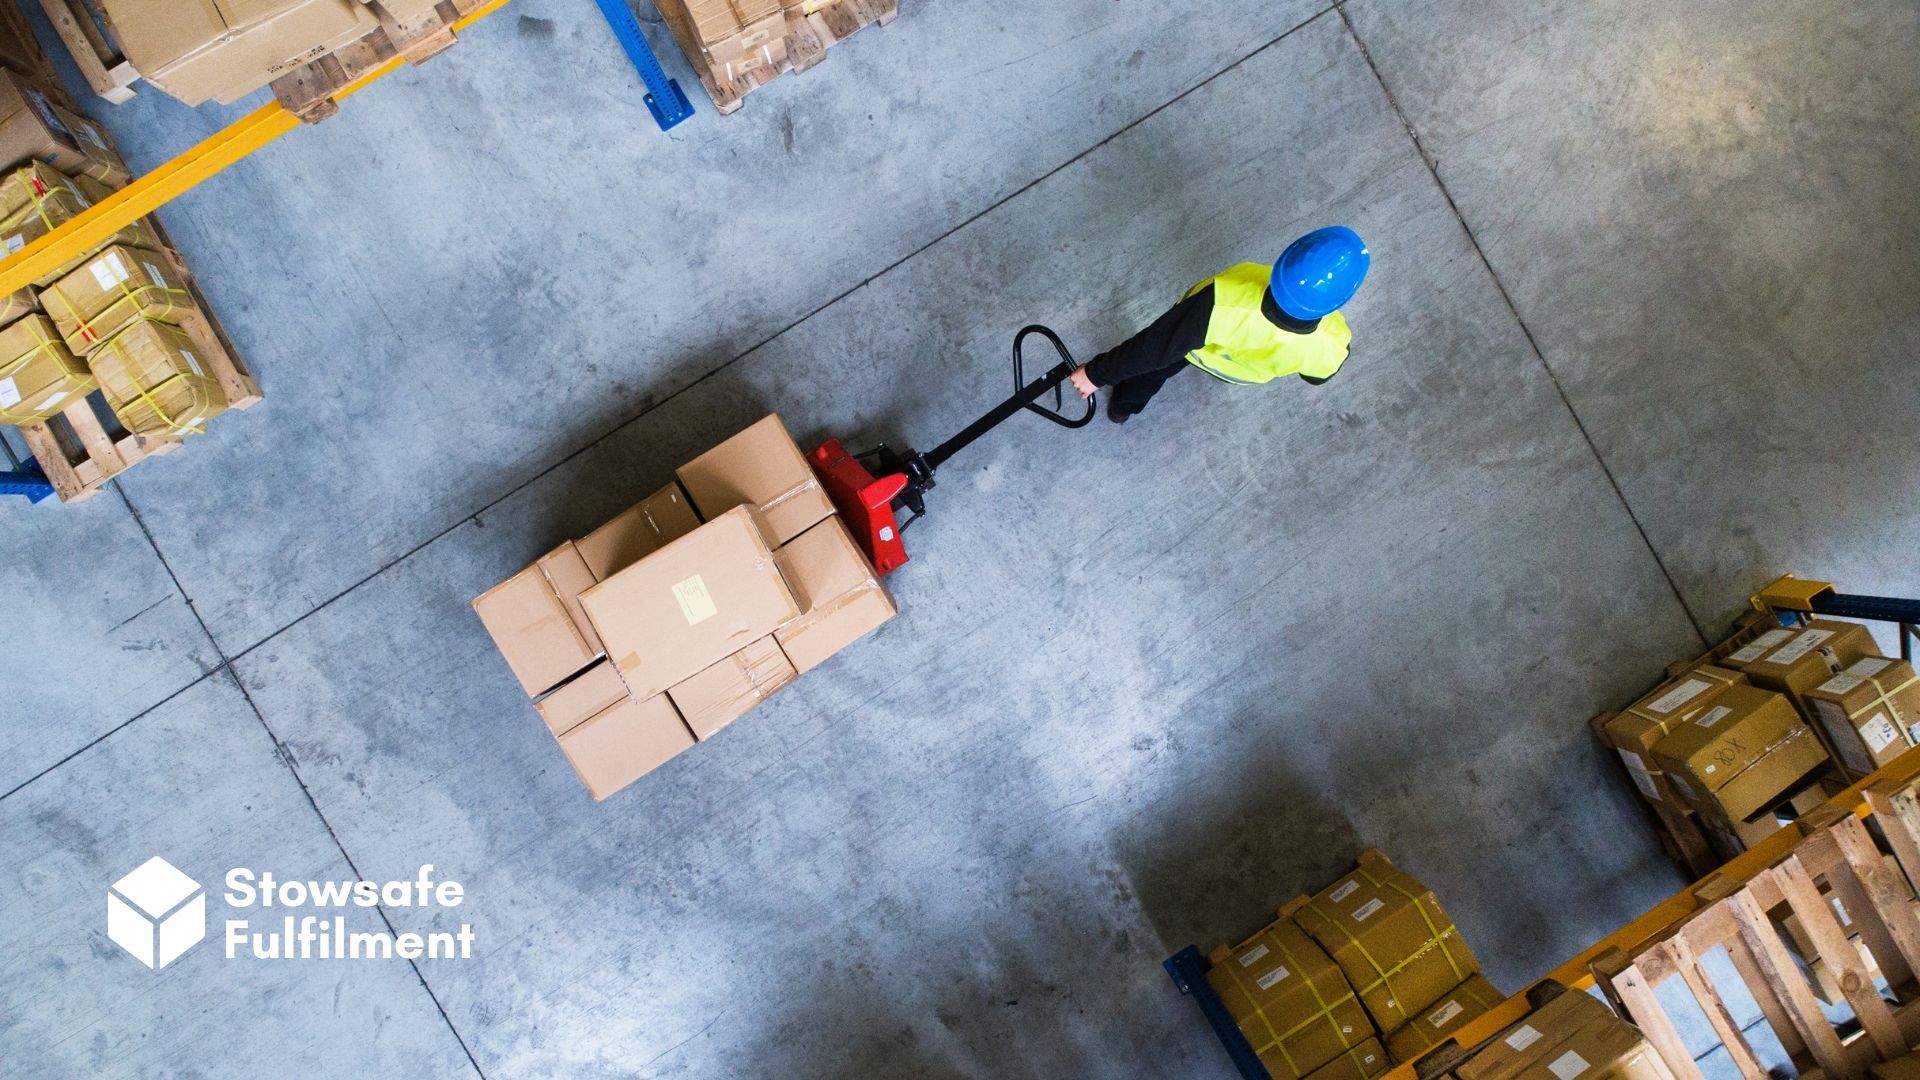 Has your business outgrown your garage? Do you need a warehouse or fulfilment centre? What's the difference, anyway? Find out in our guide.
